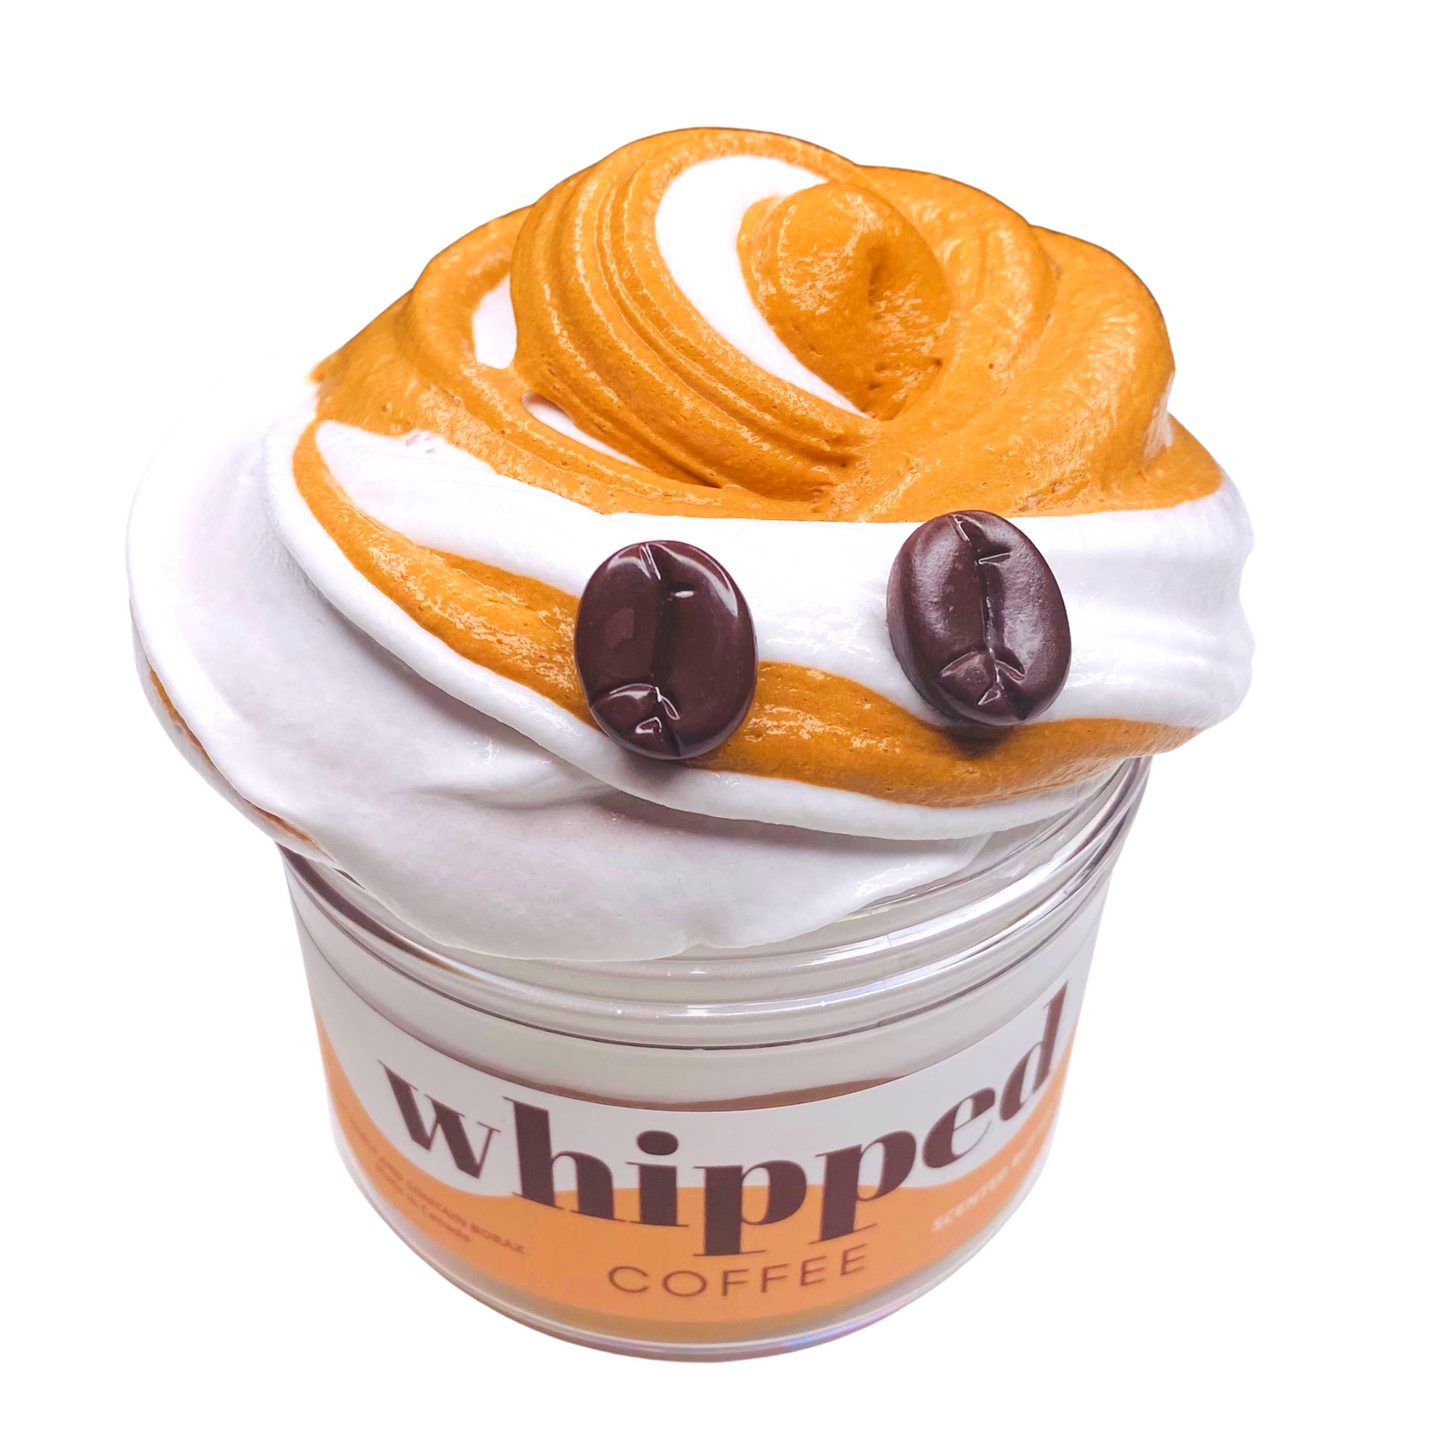 WHIPPED COFFEE BUTTER SLIME